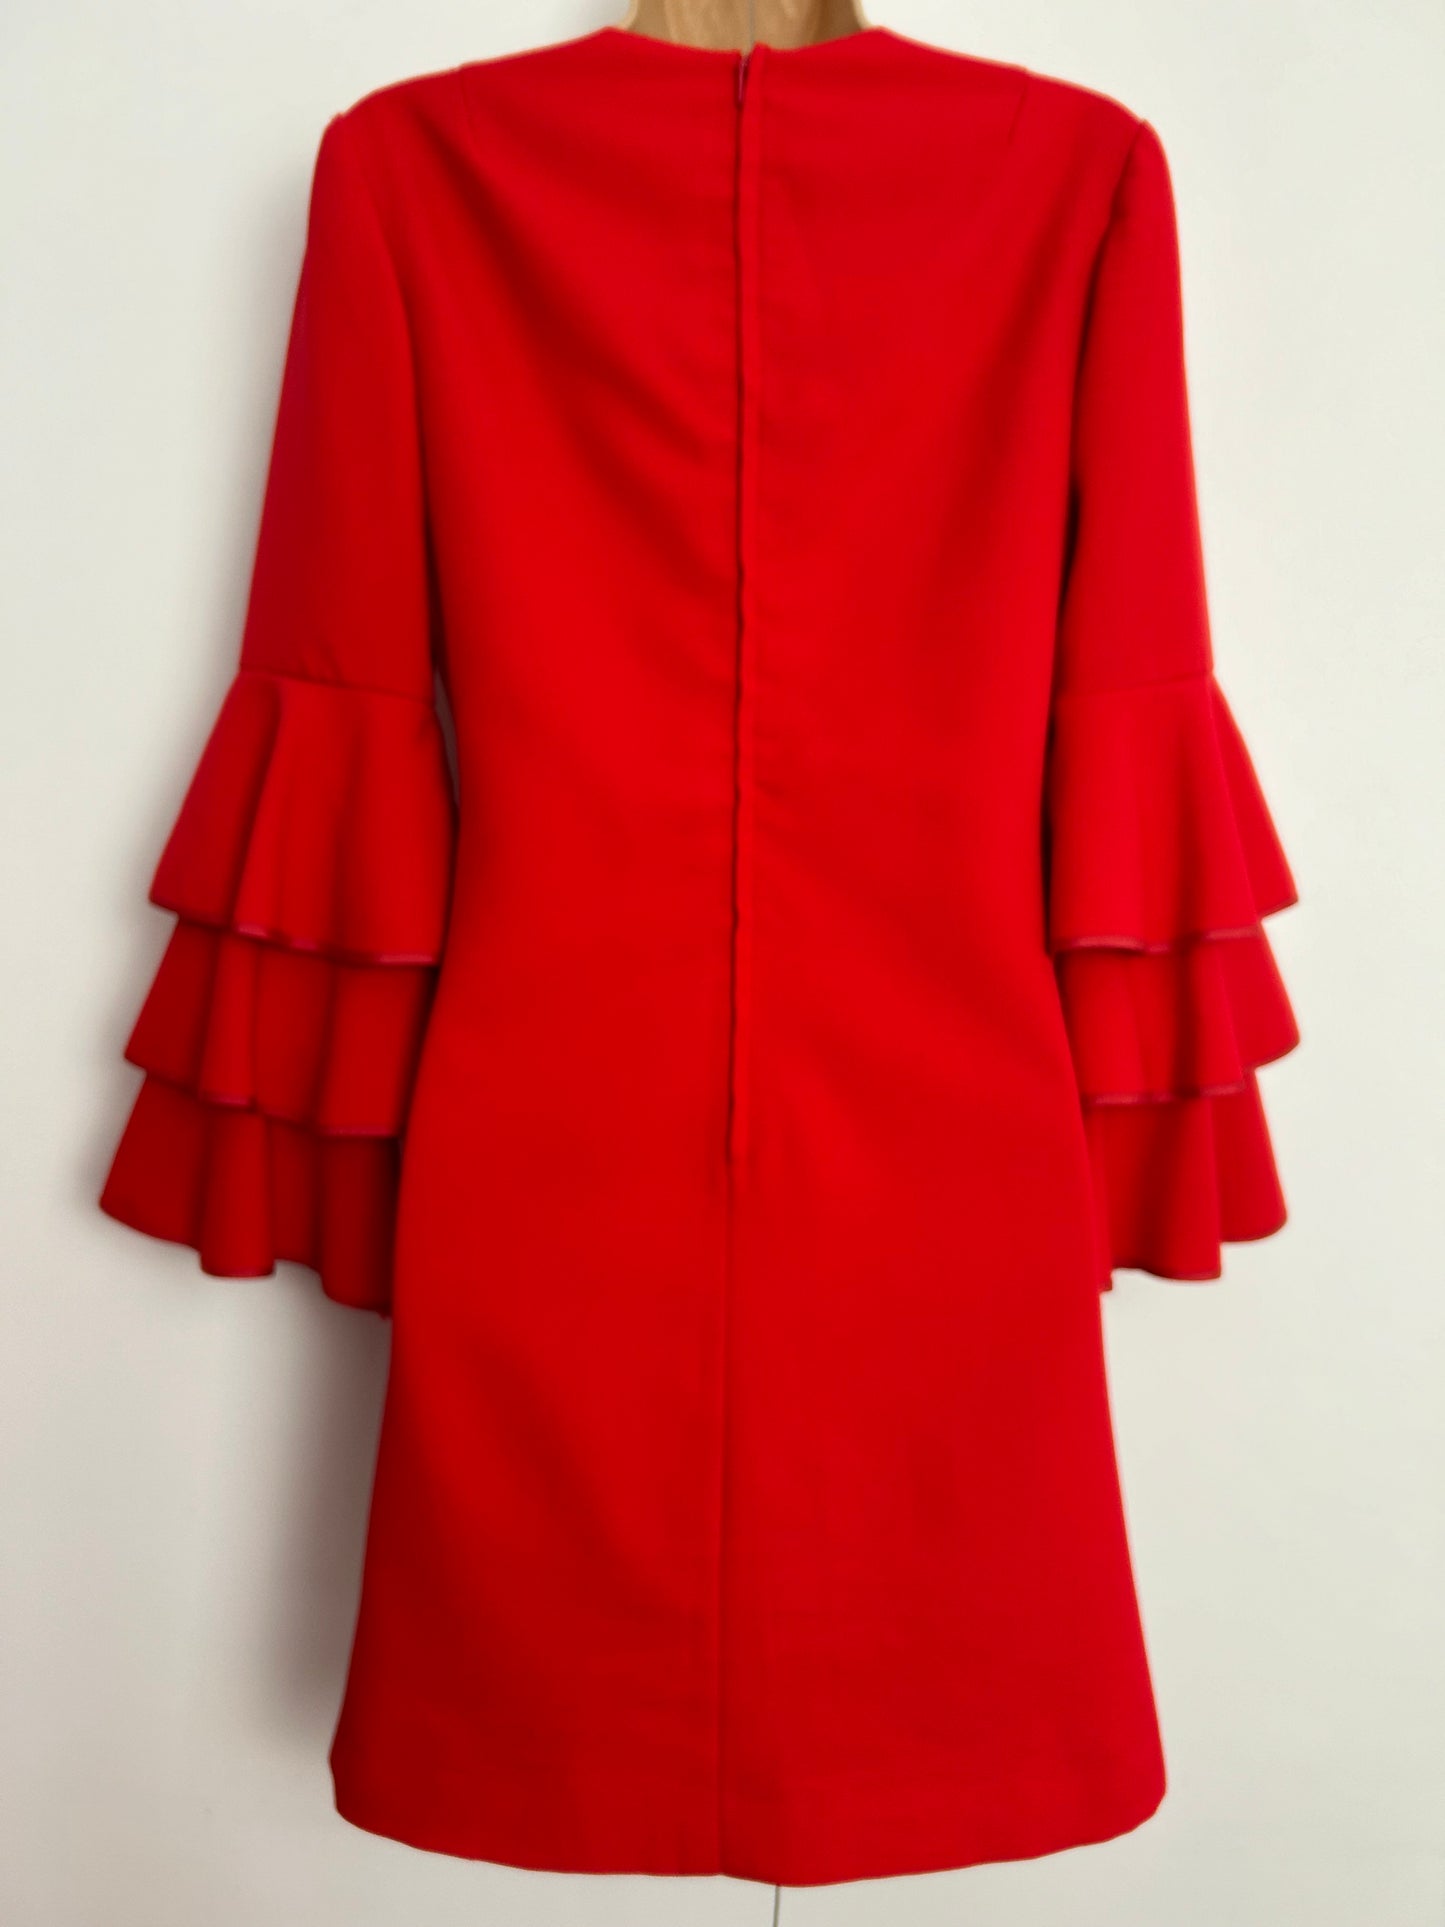 Vintage 1960s Early 1970s UK Size 8 Red Long Layered Sleeve Mini Mod Shift Dress